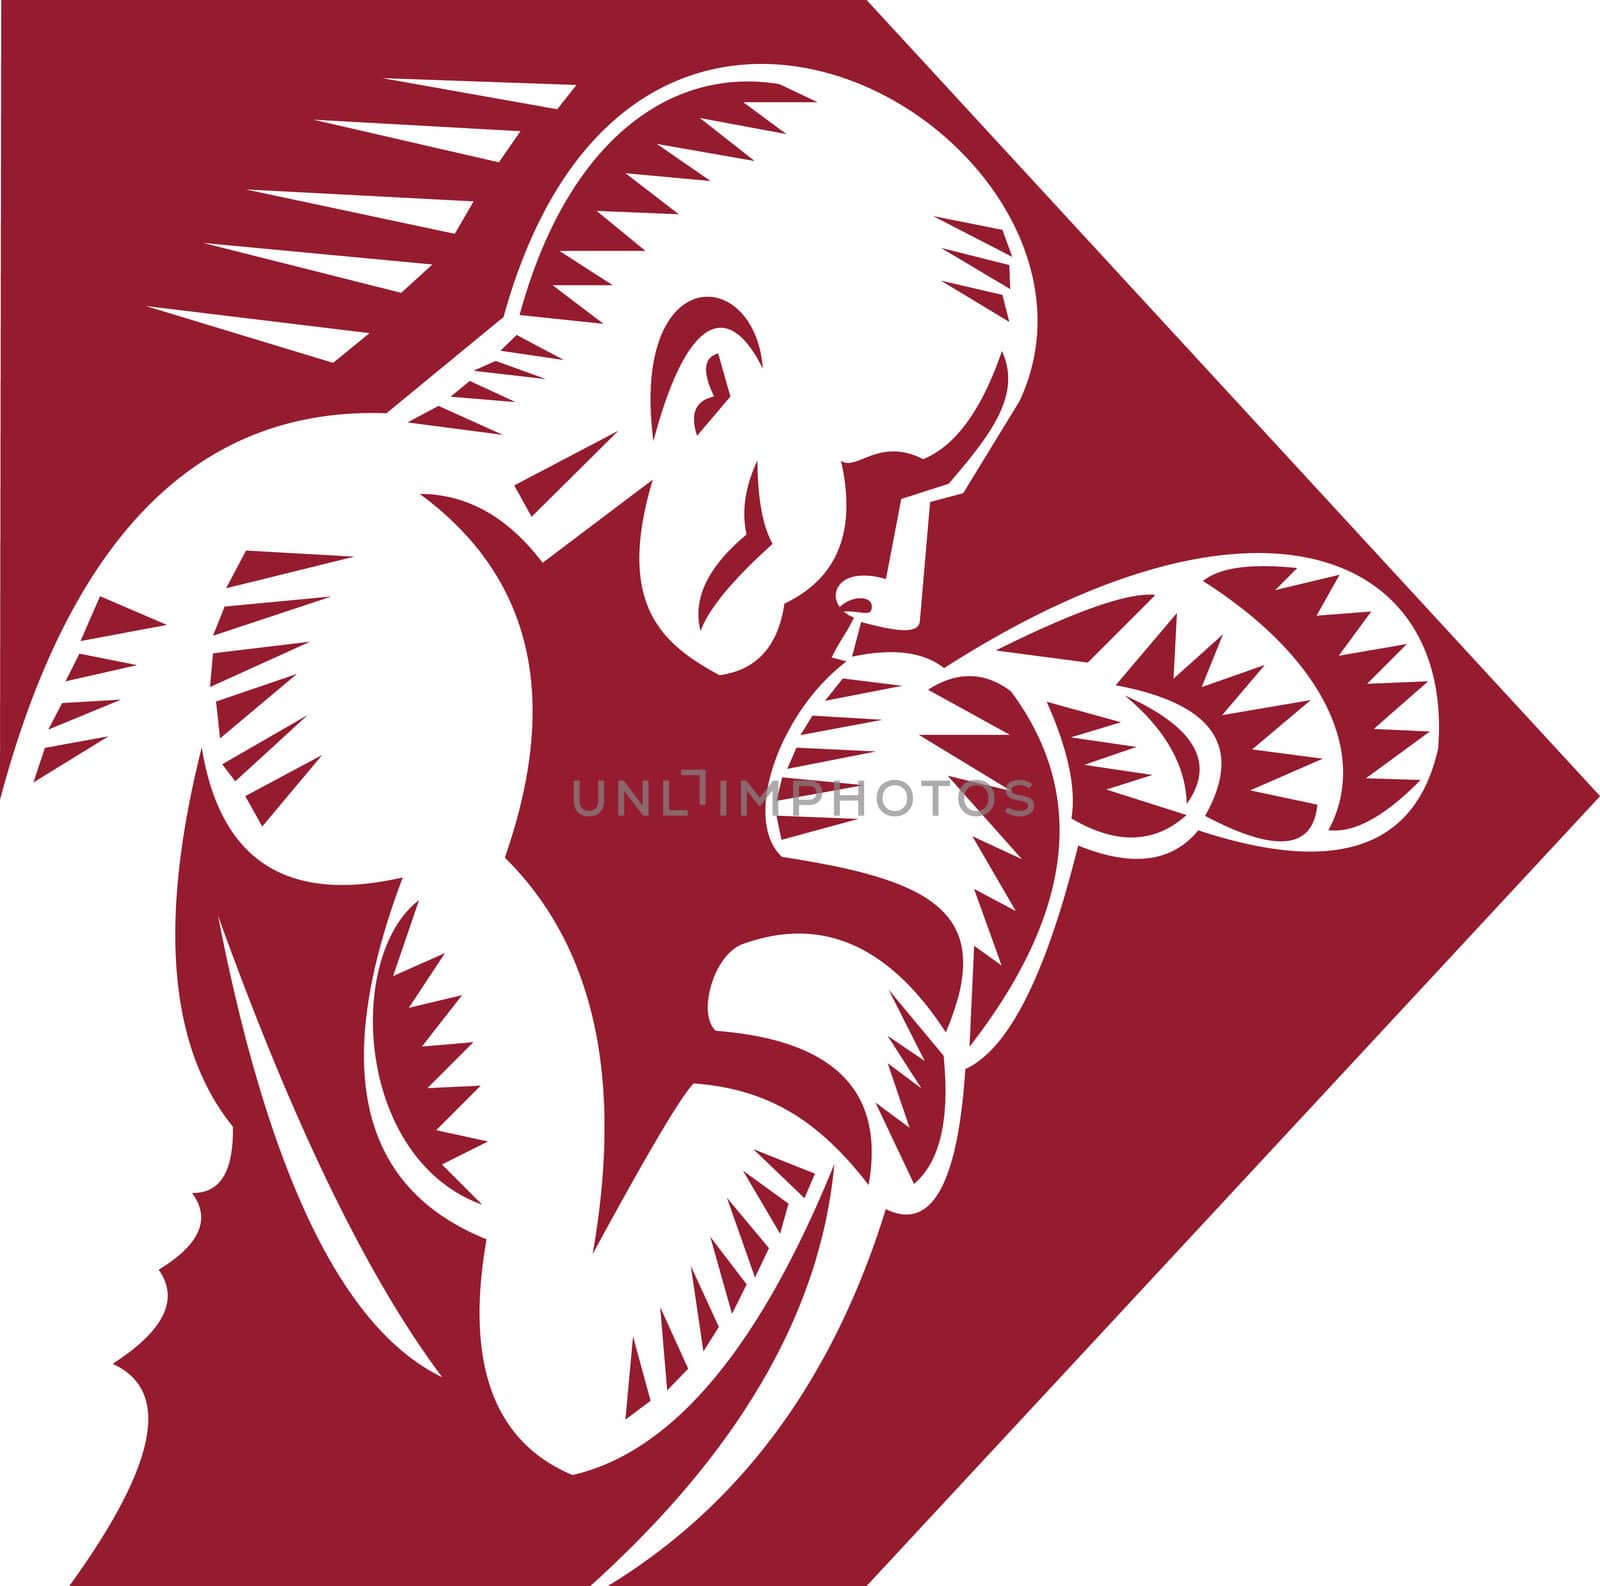 Imagery shows a boxer jabbing viewed from the side. Done in single color.